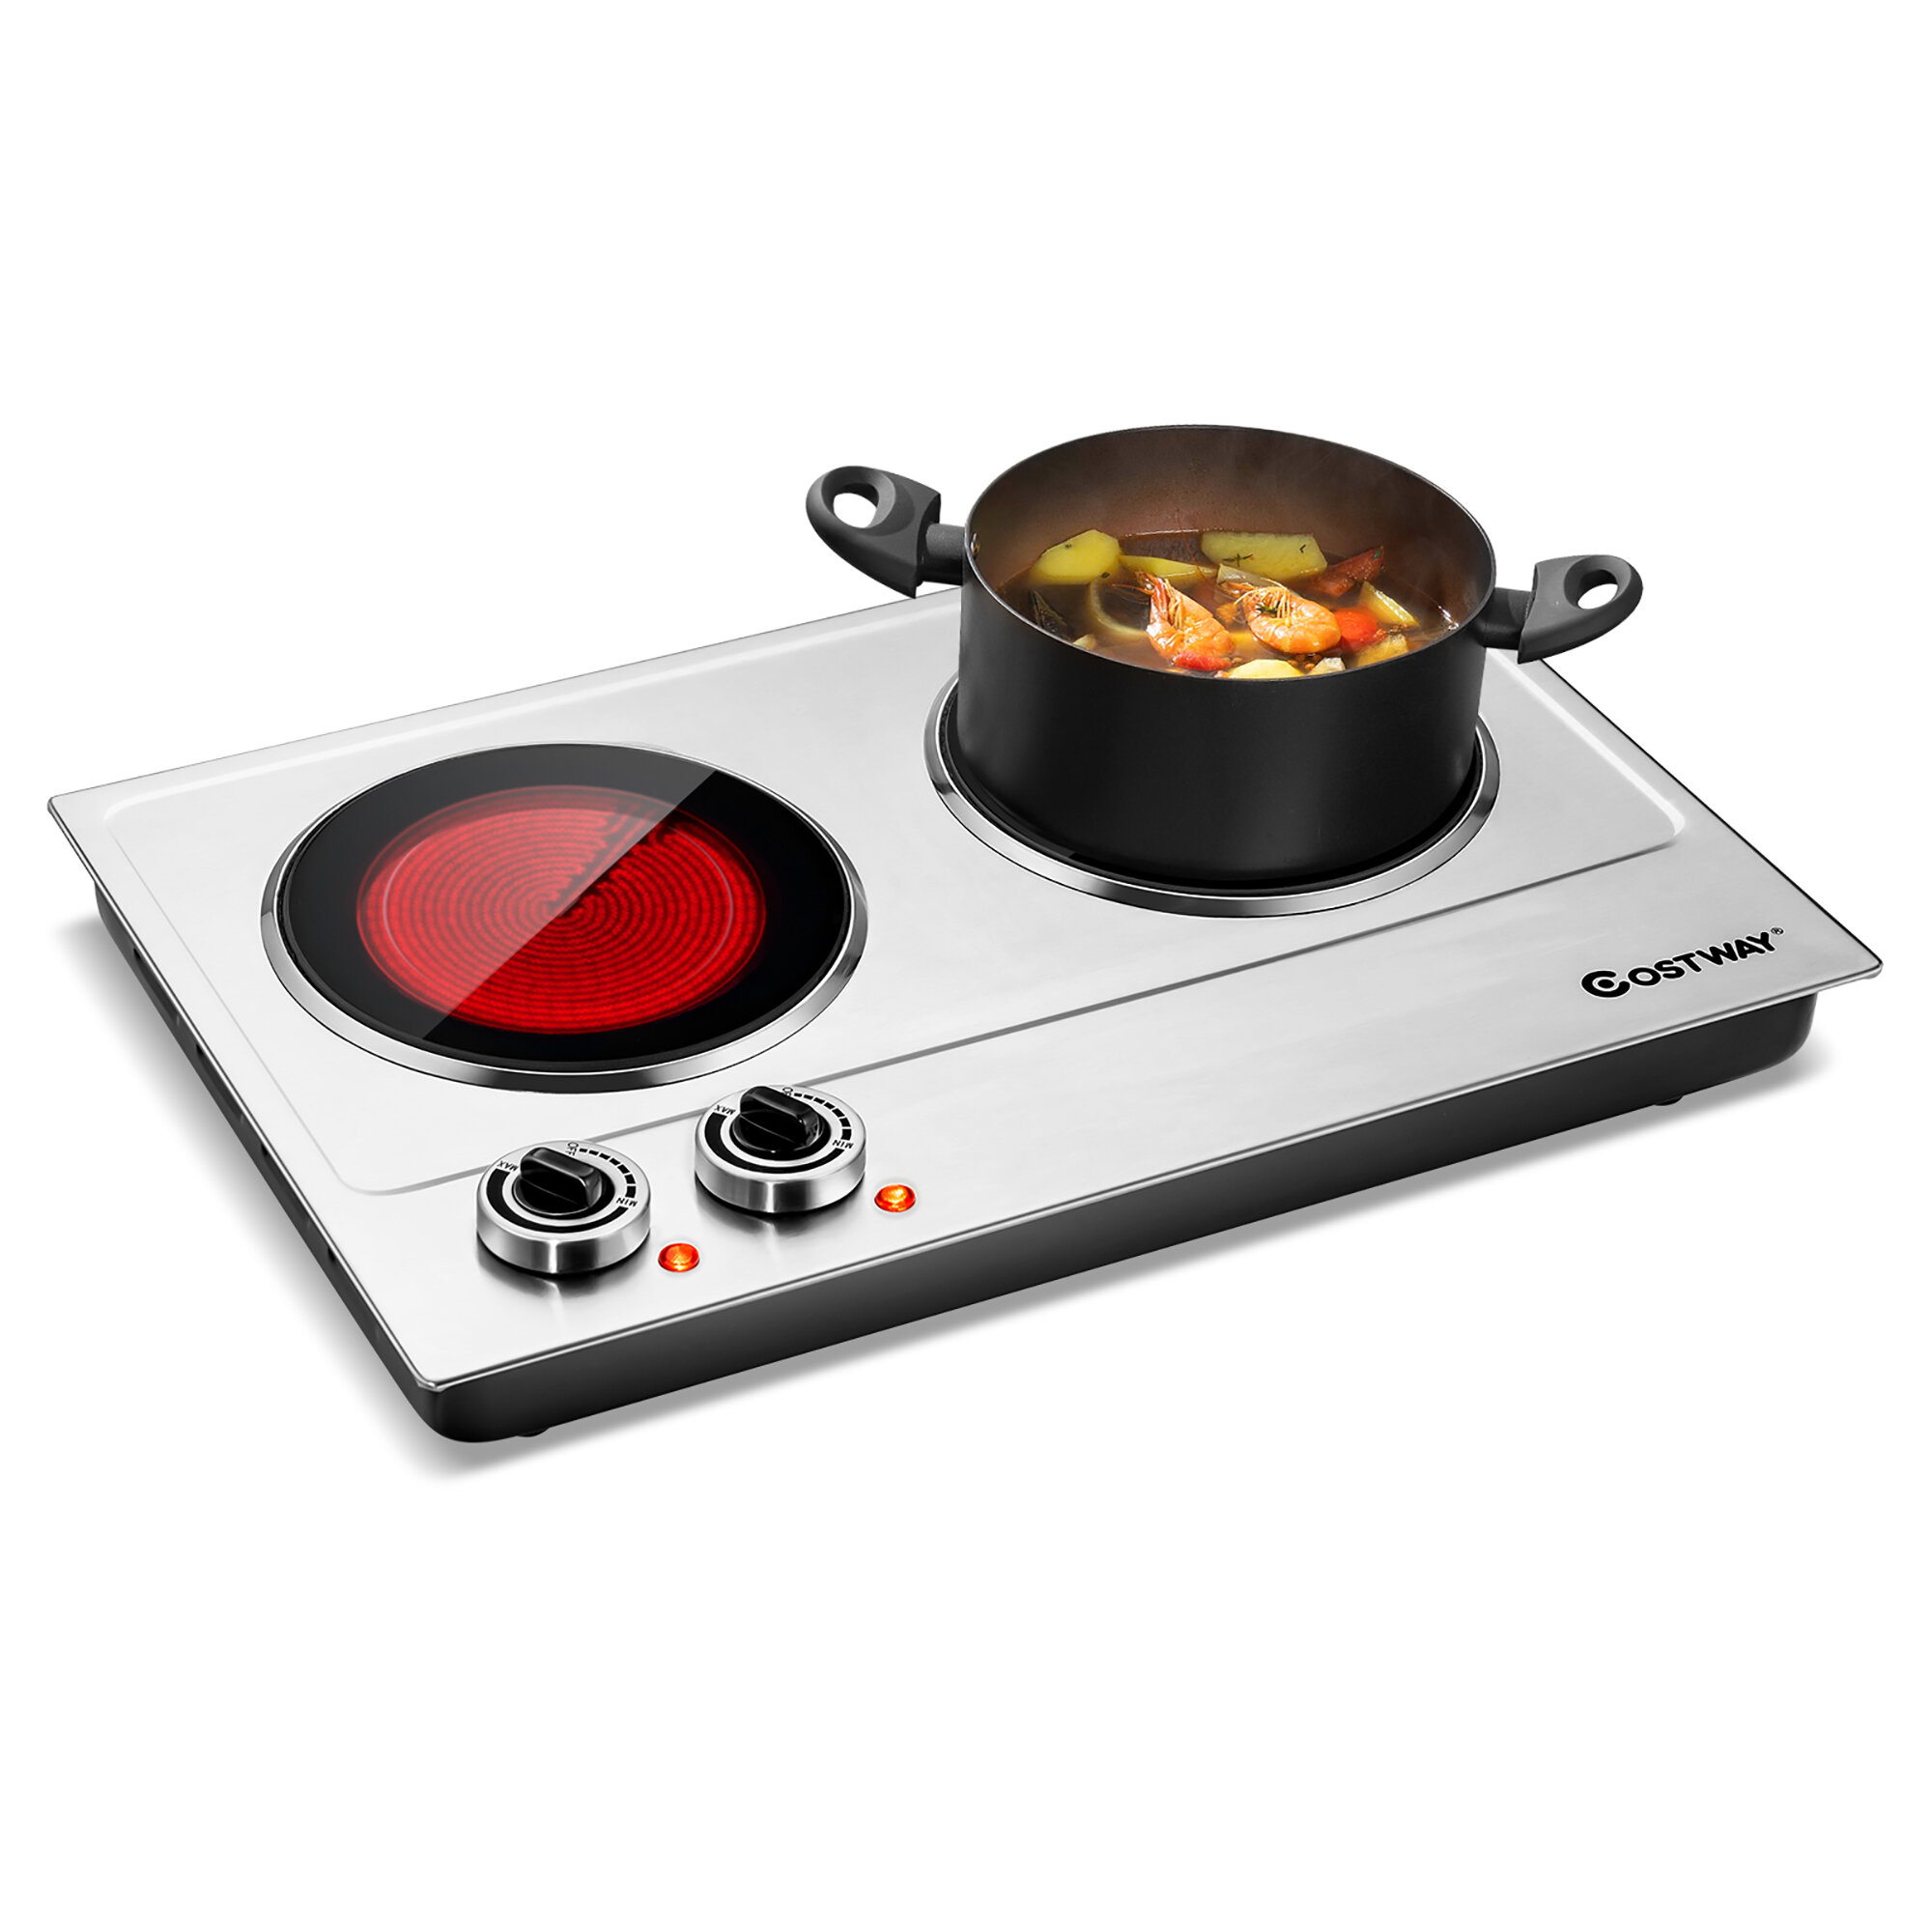 CUSIMAX 1800W Double Hot Plate for Cooking Double Burners Electric  Countertop Burner Cast Iron Hot Plates Cooktop Stainless Steel Silver